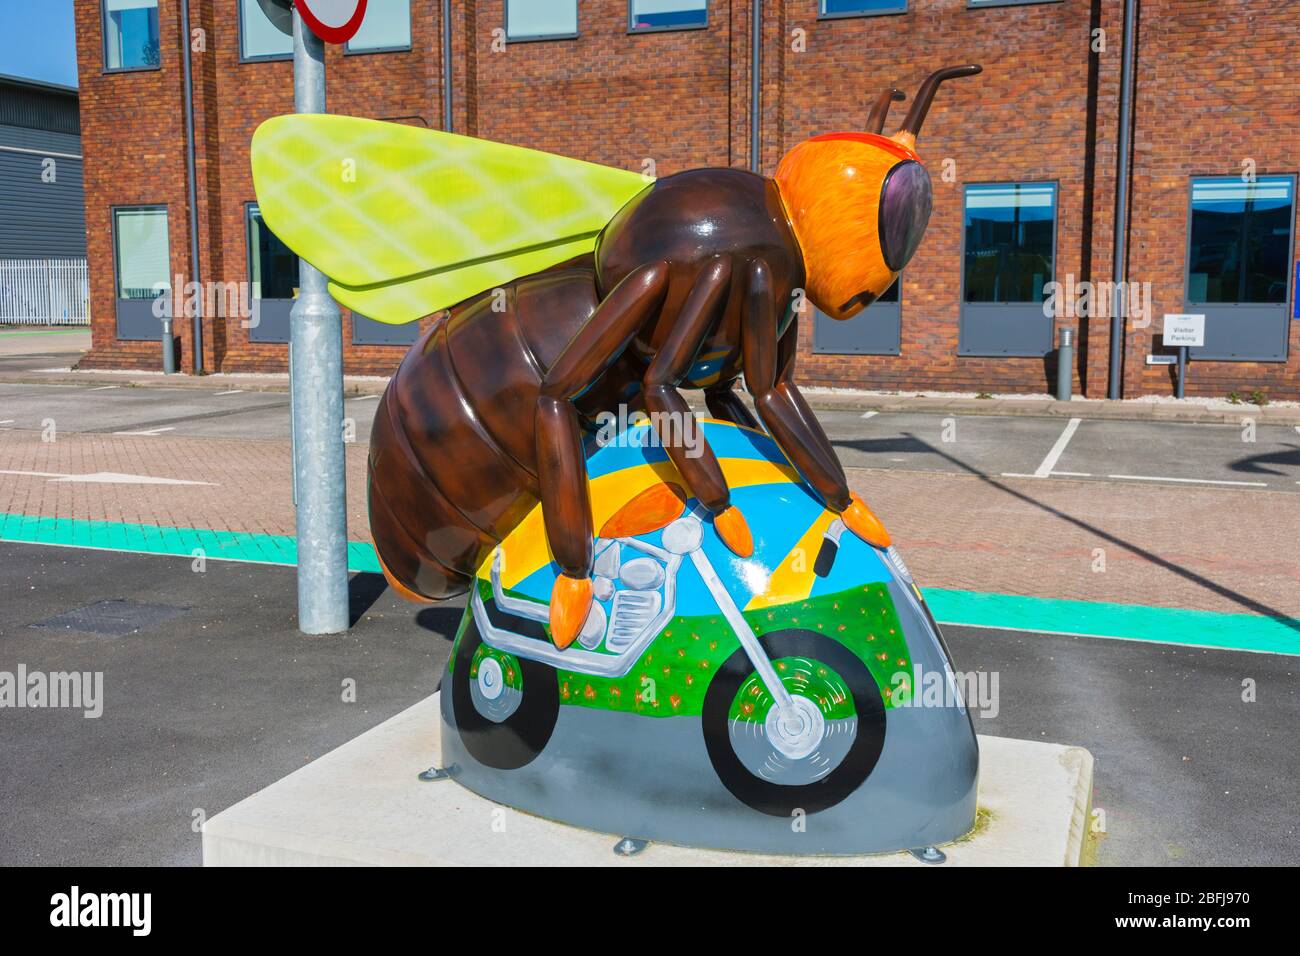 Bee-sy Rider, by Anne-Marie Byrne.  One of the Bee in the City sculptures, now outside an office building on Village Way, Trafford, Manchester, UK Stock Photo